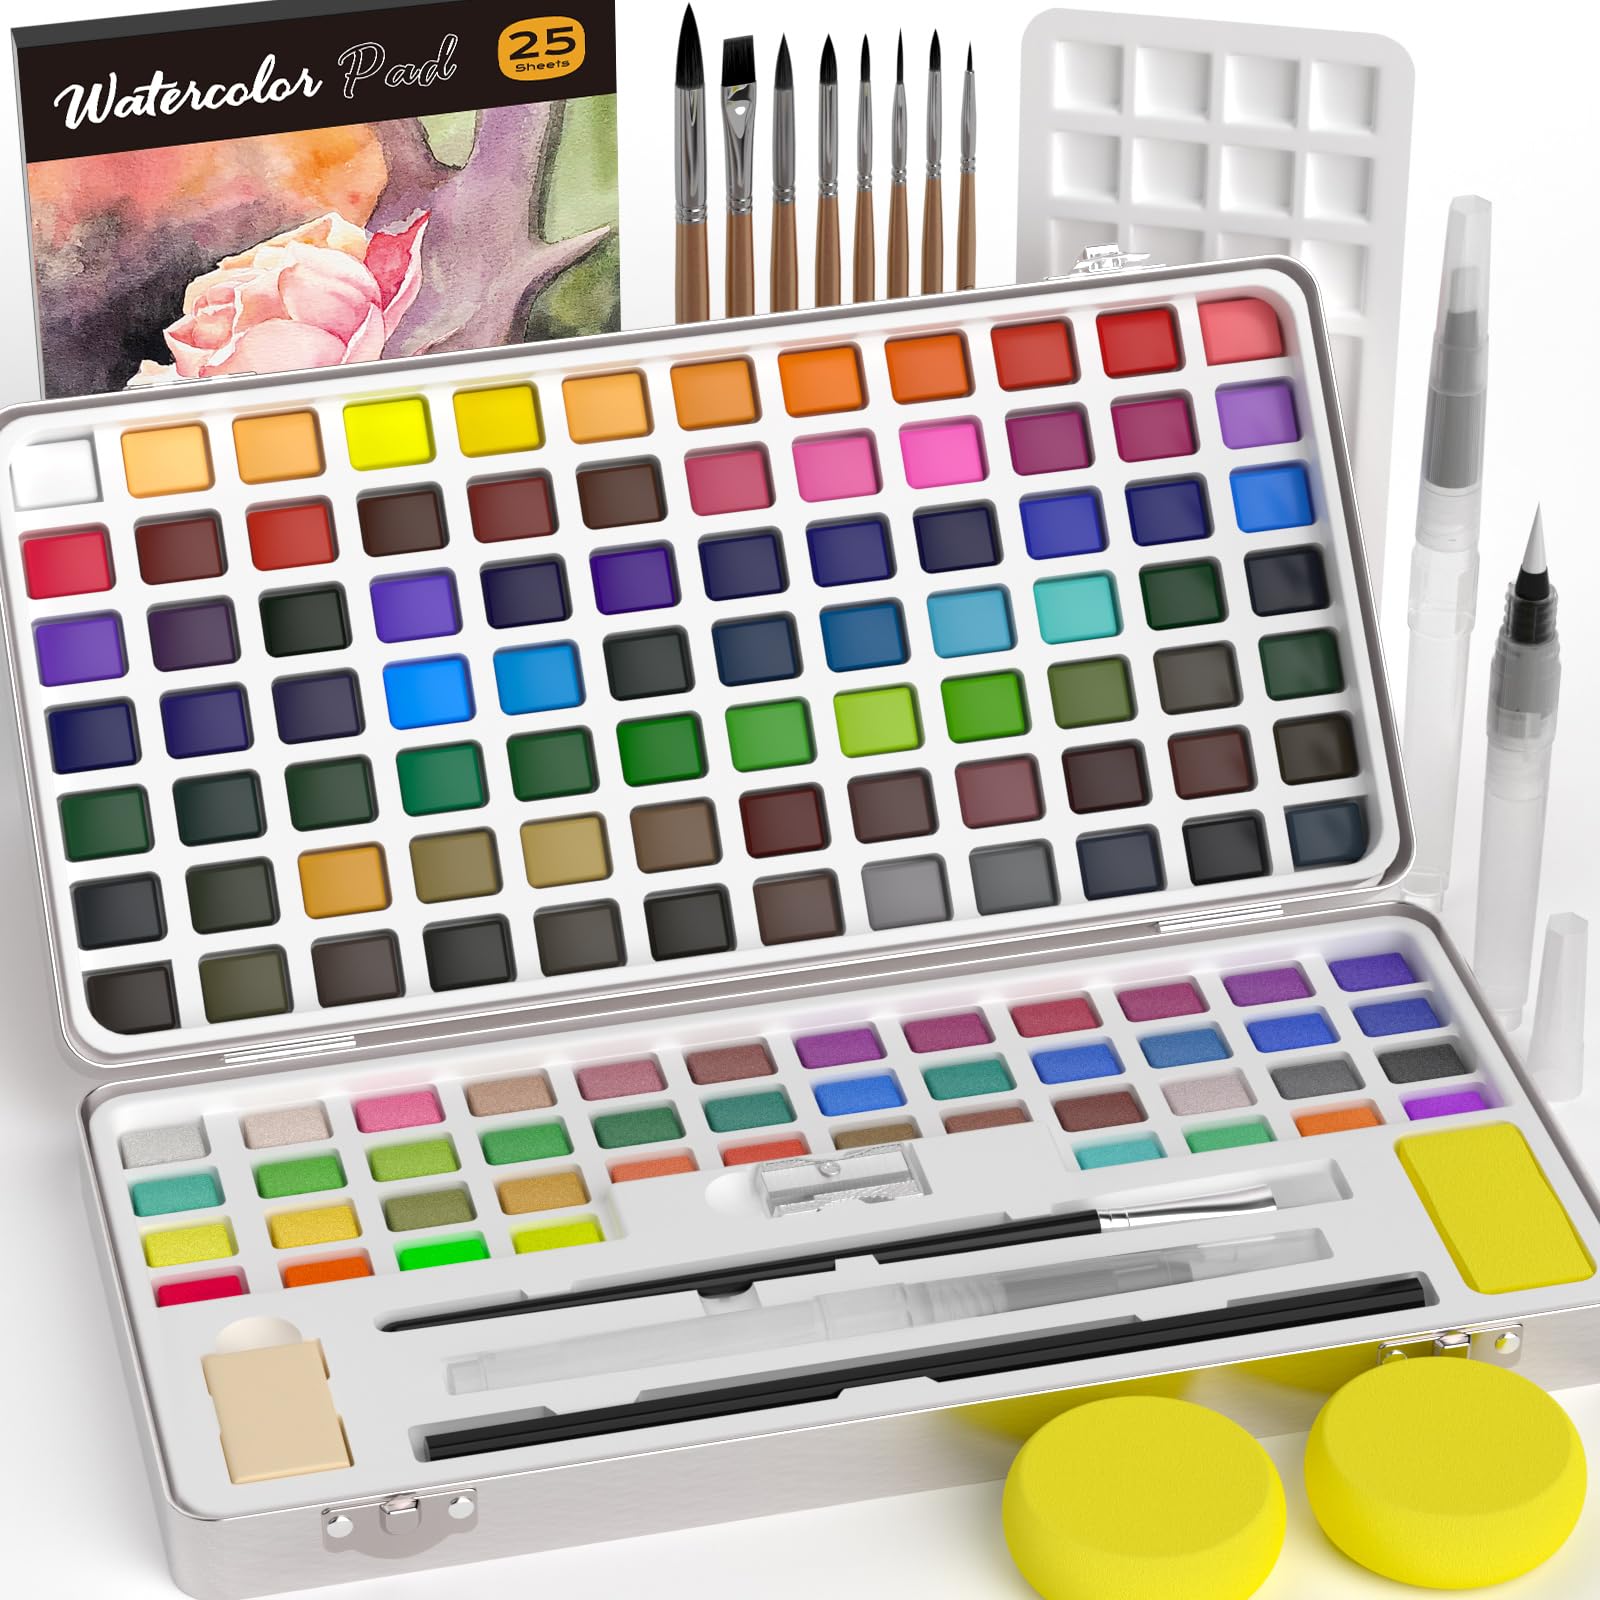 Nicpro 128 Colors Watercolor Paint Set include Metallic Macaron & Fluorescent, 8 Squirrel Painting Brushes, 25 Water Color Paper, Palette, Art Supplies Kit for Artist Adult Kid Beginner with Gift Box